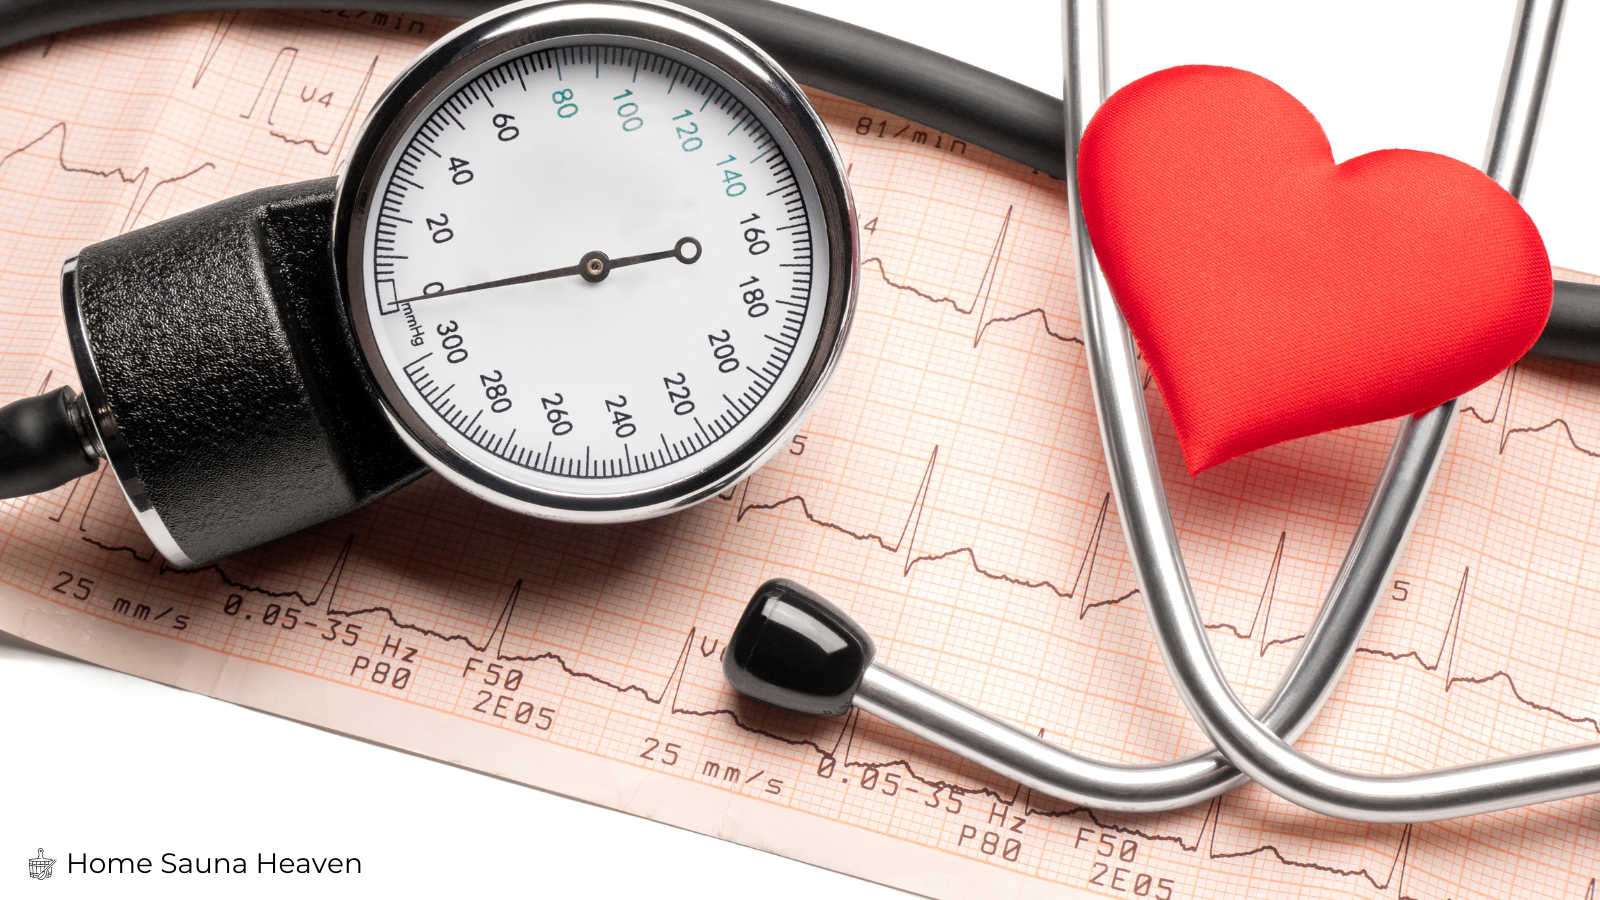 blood pressure gauge and an image of a heart